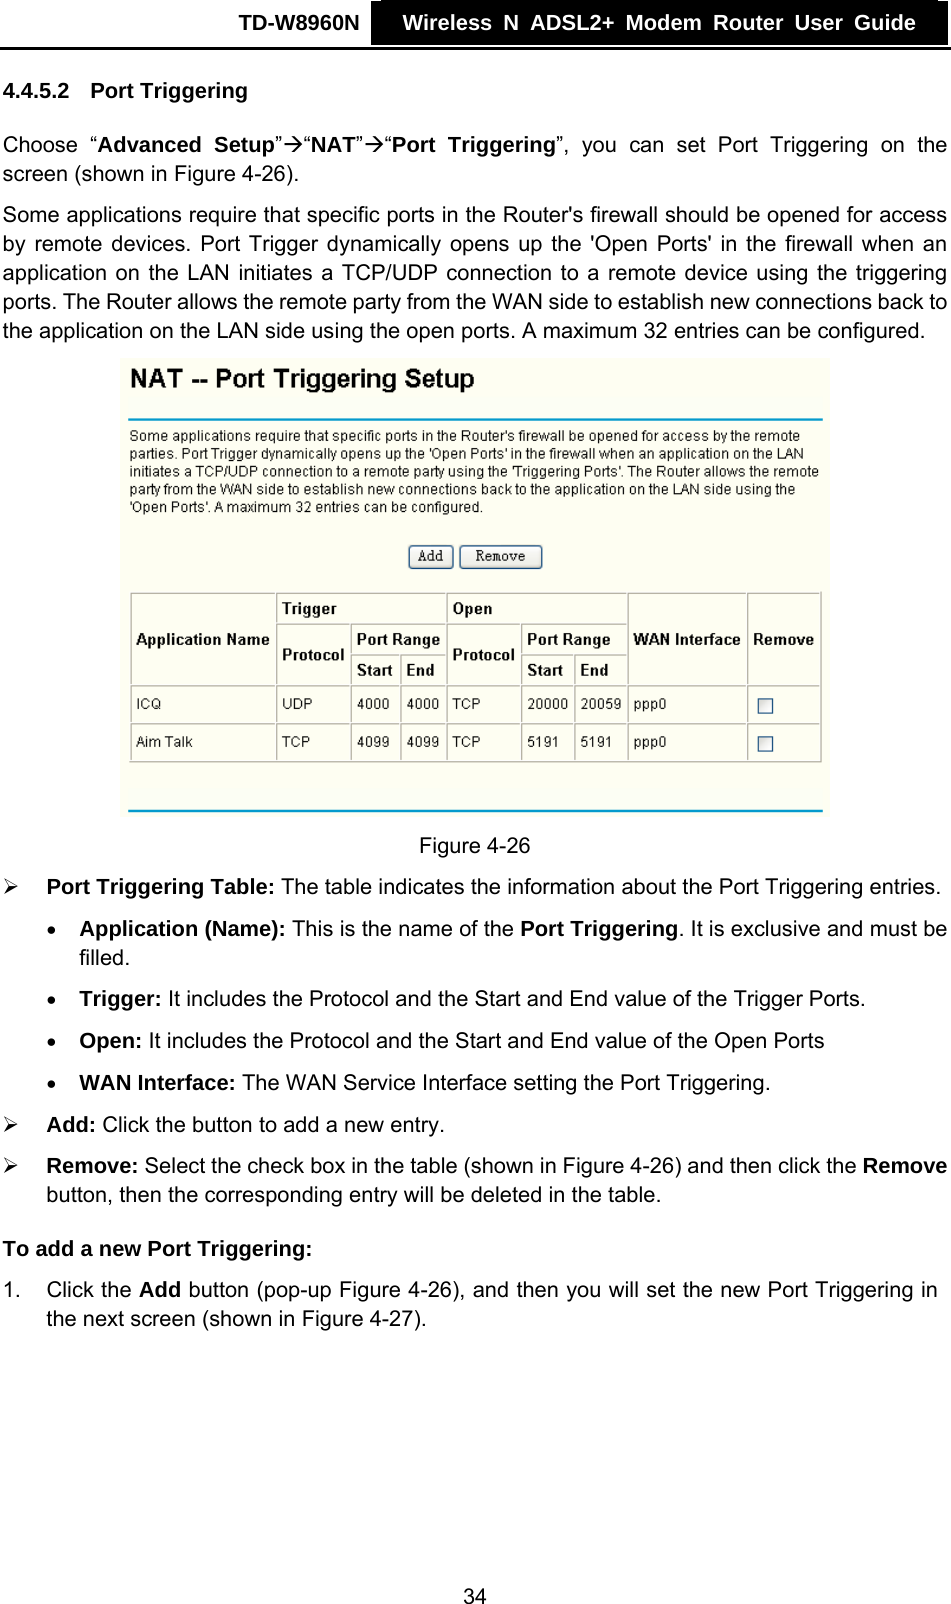 TD-W8960N    Wireless N ADSL2+ Modem Router User Guide    4.4.5.2  Port Triggering Choose “Advanced Setup”Æ“NAT”Æ“Port Triggering”, you can set Port Triggering on the screen (shown in Figure 4-26). Some applications require that specific ports in the Router&apos;s firewall should be opened for access by remote devices. Port Trigger dynamically opens up the &apos;Open Ports&apos; in the firewall when an application on the LAN initiates a TCP/UDP connection to a remote device using the triggering ports. The Router allows the remote party from the WAN side to establish new connections back to the application on the LAN side using the open ports. A maximum 32 entries can be configured.  Figure 4-26 ¾ Port Triggering Table: The table indicates the information about the Port Triggering entries. • Application (Name): This is the name of the Port Triggering. It is exclusive and must be filled. • Trigger: It includes the Protocol and the Start and End value of the Trigger Ports. • Open: It includes the Protocol and the Start and End value of the Open Ports • WAN Interface: The WAN Service Interface setting the Port Triggering. ¾ Add: Click the button to add a new entry. ¾ Remove: Select the check box in the table (shown in Figure 4-26) and then click the Remove button, then the corresponding entry will be deleted in the table. To add a new Port Triggering: 1. Click the Add button (pop-up Figure 4-26), and then you will set the new Port Triggering in the next screen (shown in Figure 4-27). 34 